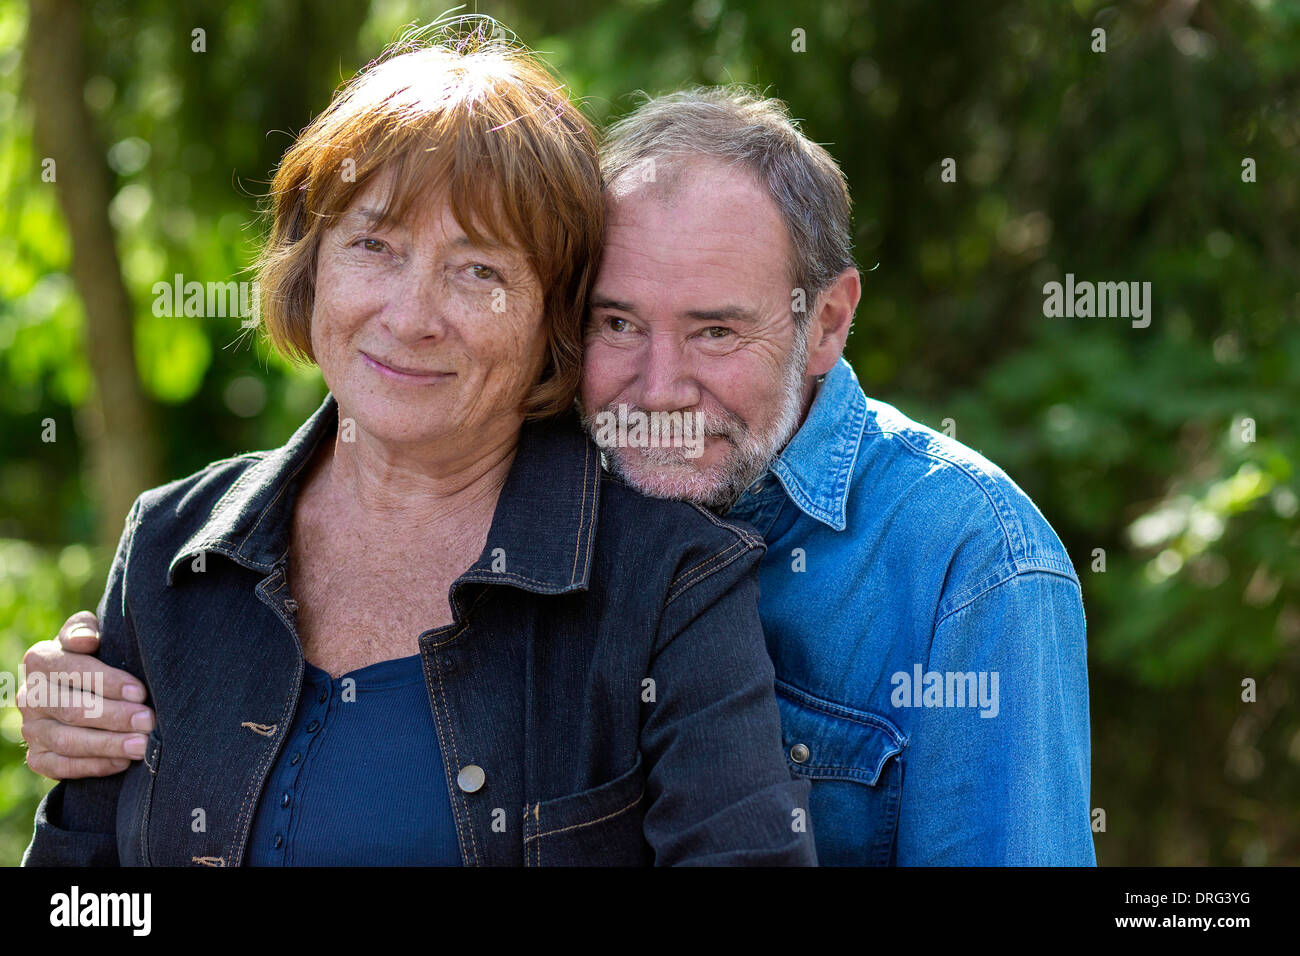 Old couple outside in a park with trees behind them Stock Photo